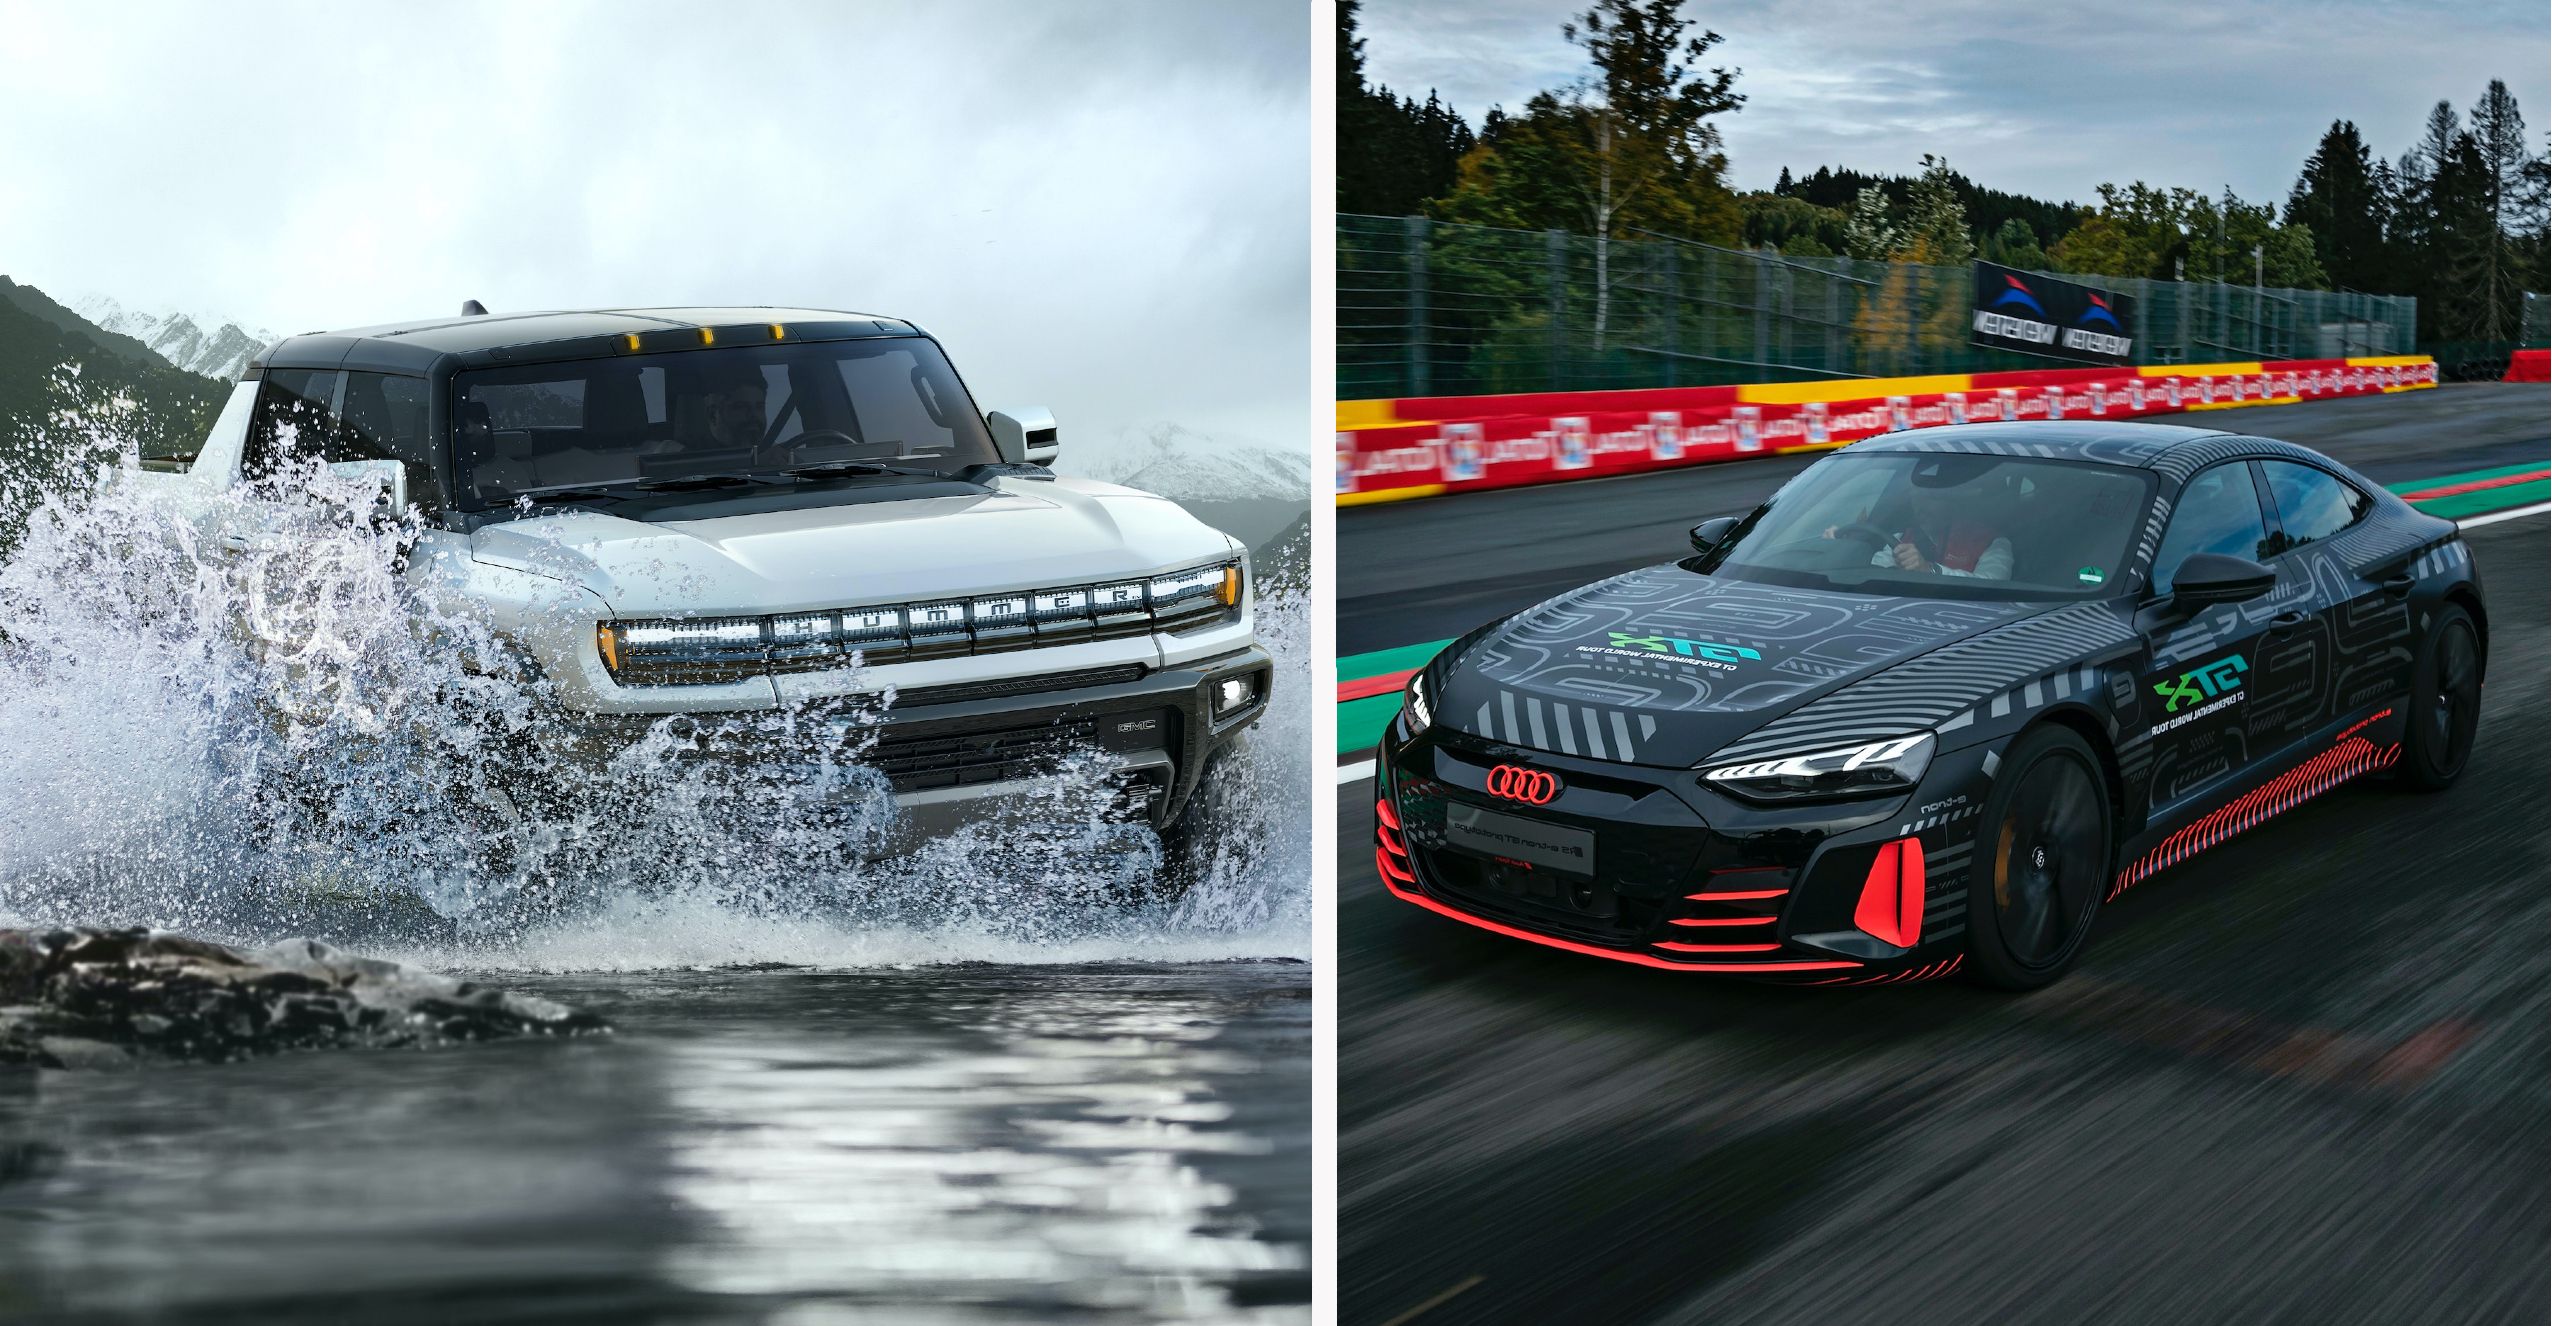 15 Best Photos Gmc Sports Car Top Speed / The Best New Supercars Hypercars And Sports Cars From The 2019 Geneva Motor Show Forbes Wheels